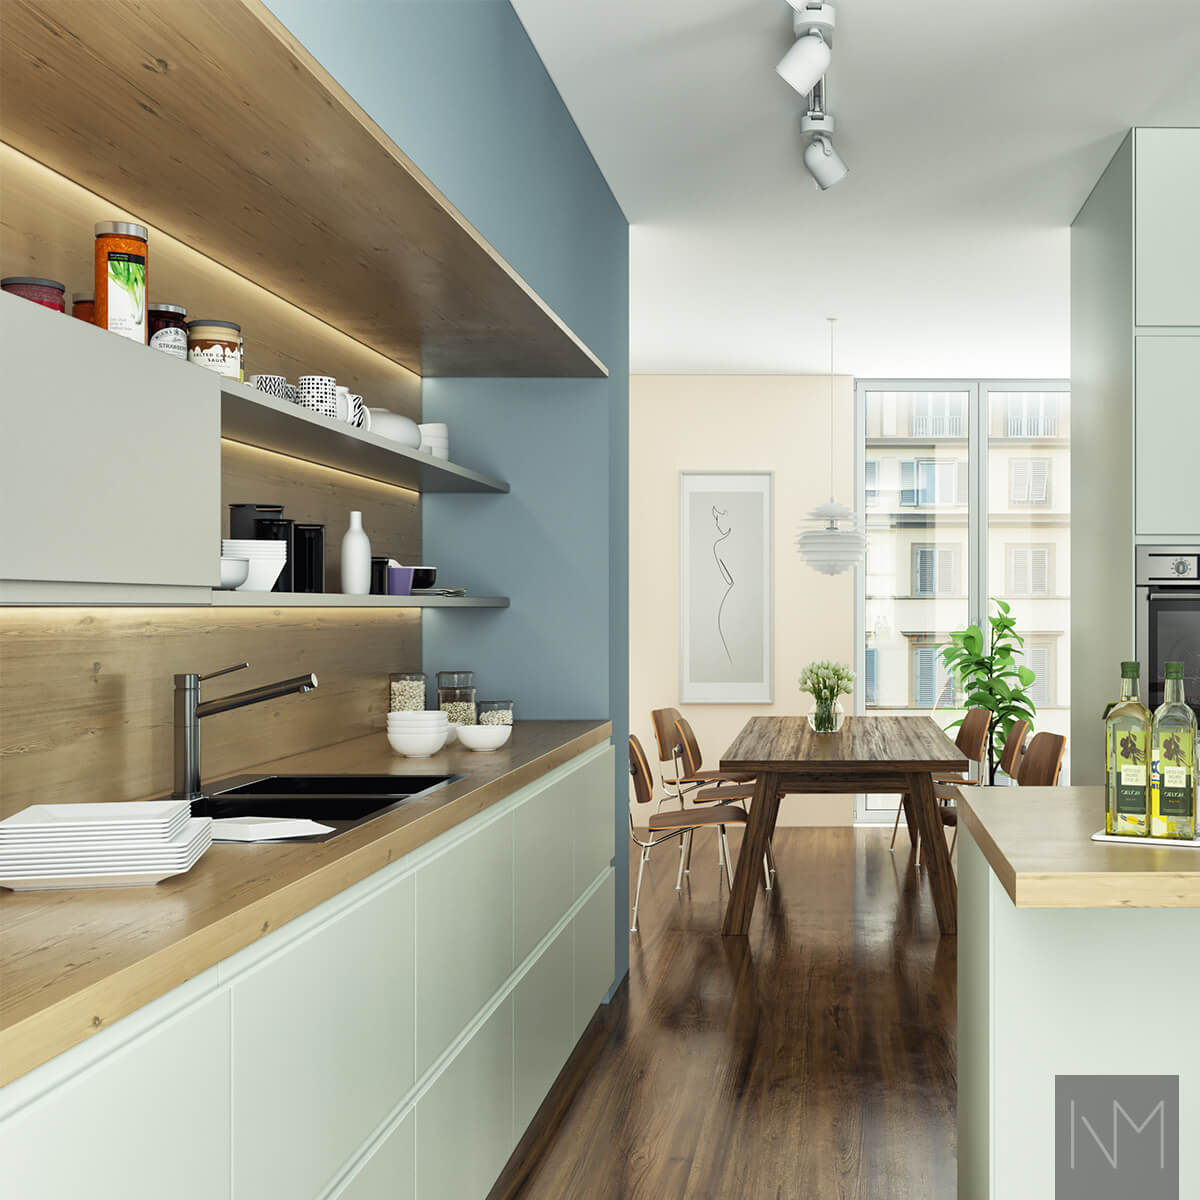 IKEA Metod or Faktum kitchen Instyle. Colour NCS 1706-G15Y or Jotun Soft Mint 7555